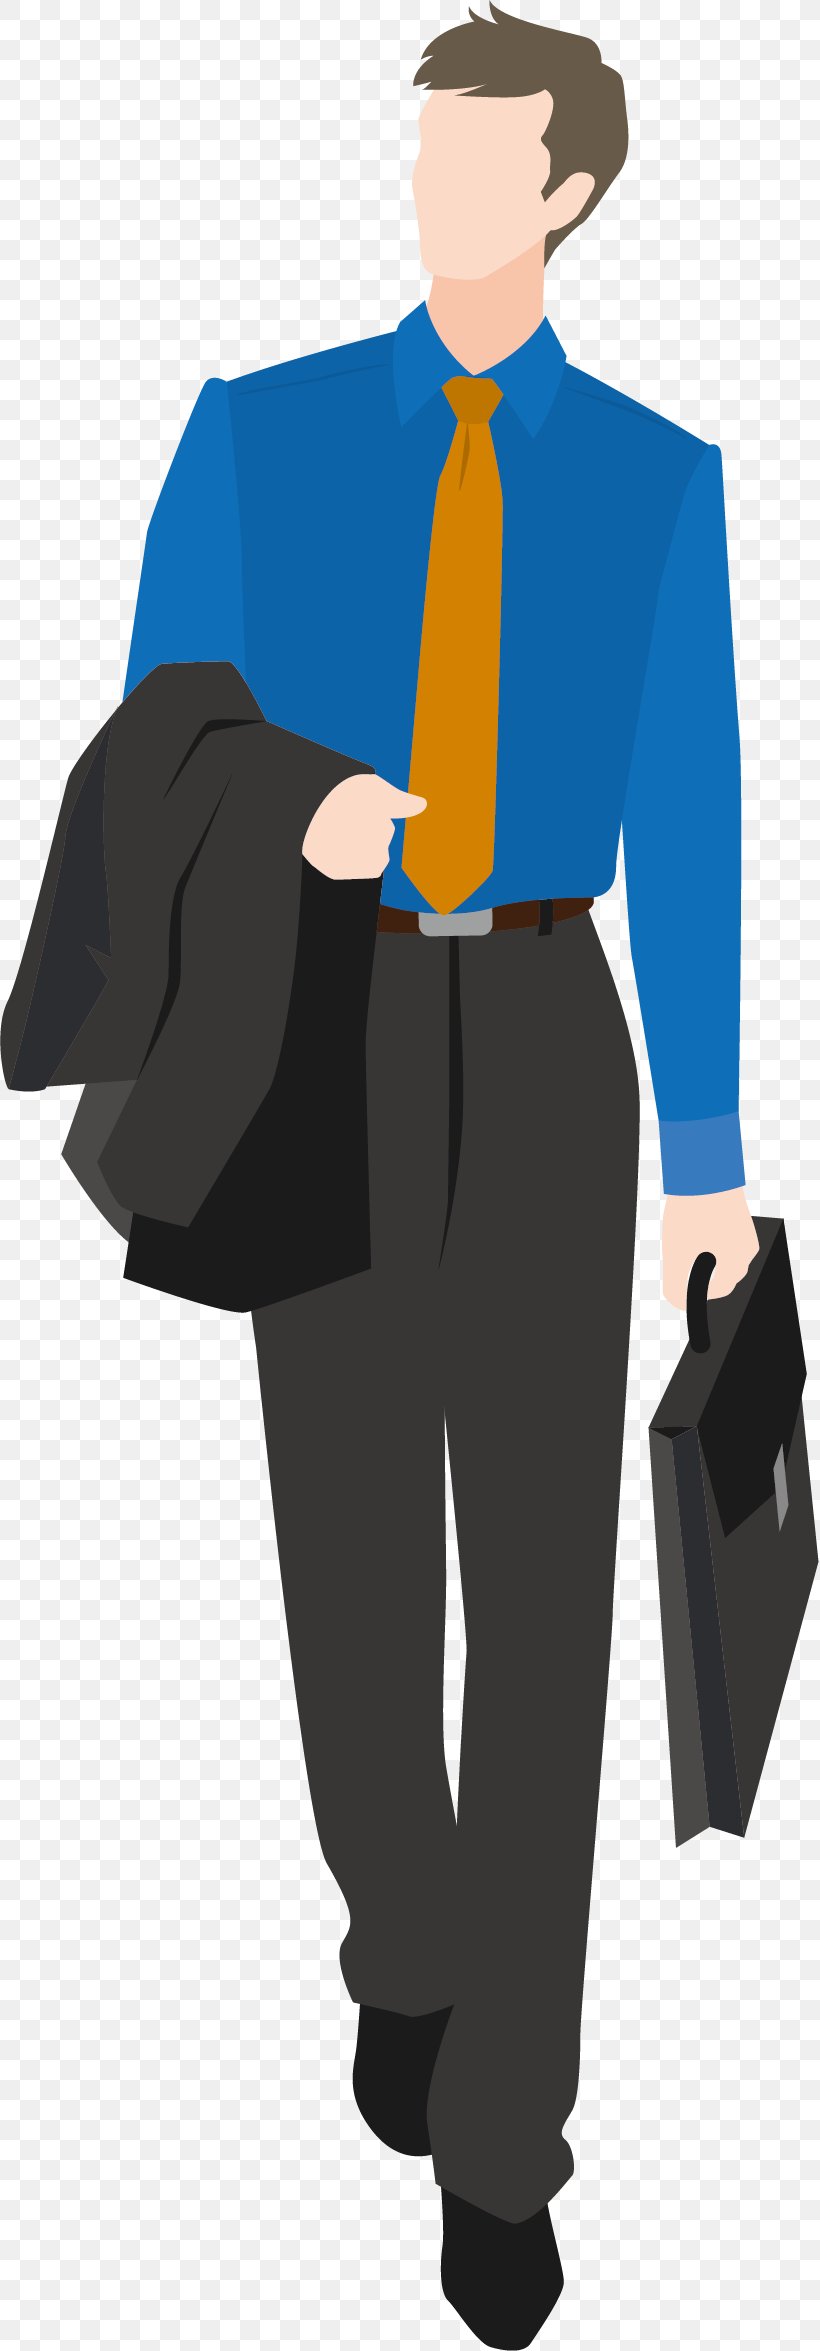 Drawing Download, PNG, 819x2351px, Drawing, Business, Businessperson, Cartoon, Formal Wear Download Free